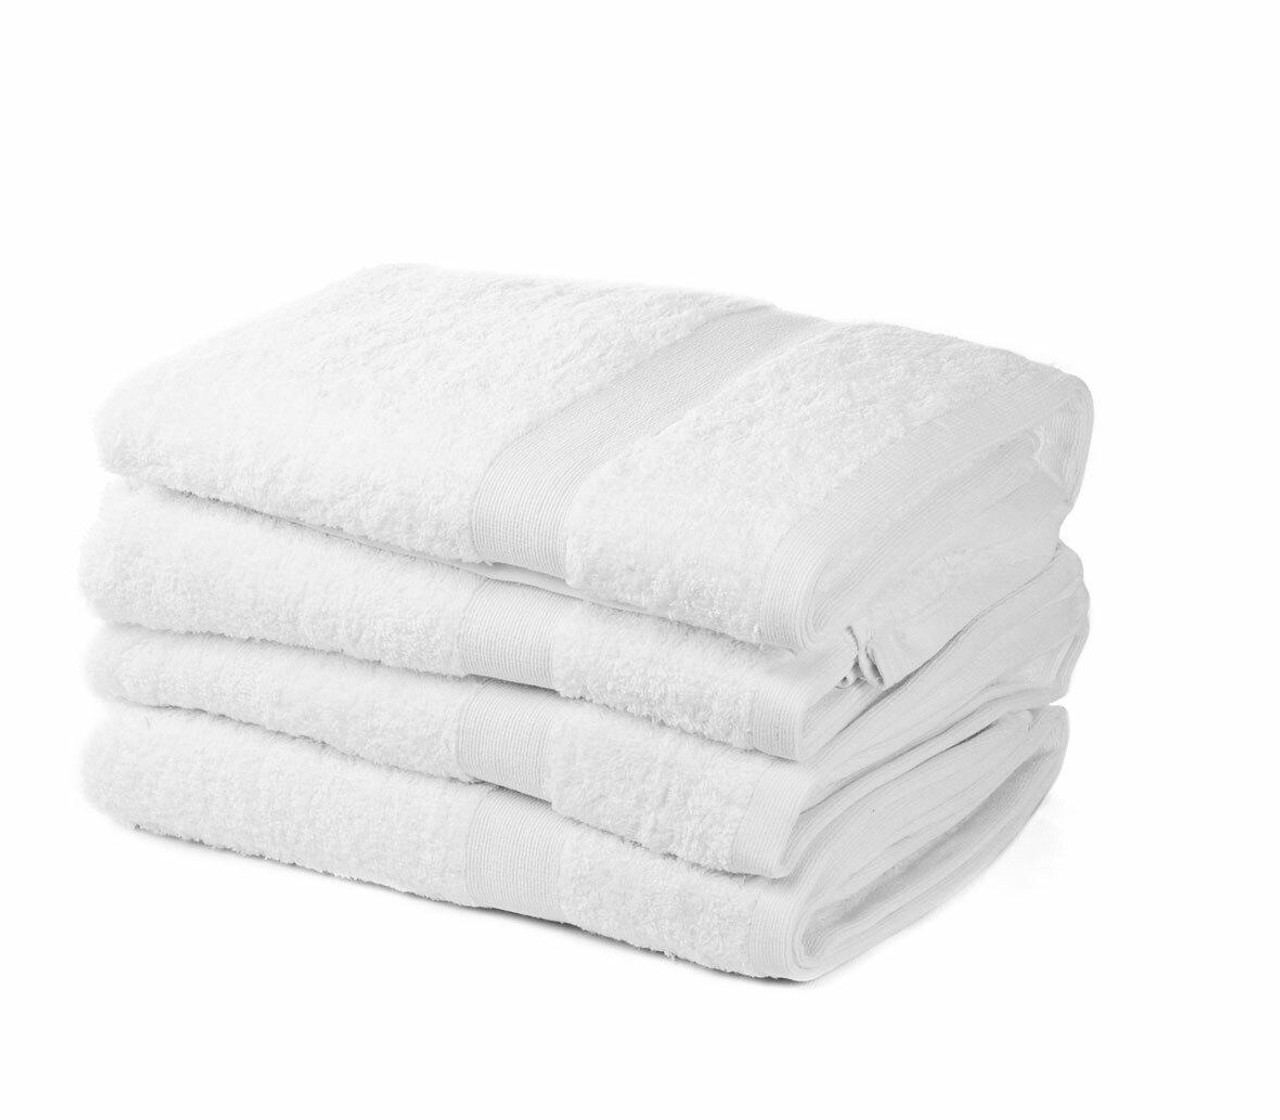 White Hand Towels 100% Cotton 50 x 90cm 500 gsm Pack Set of 6